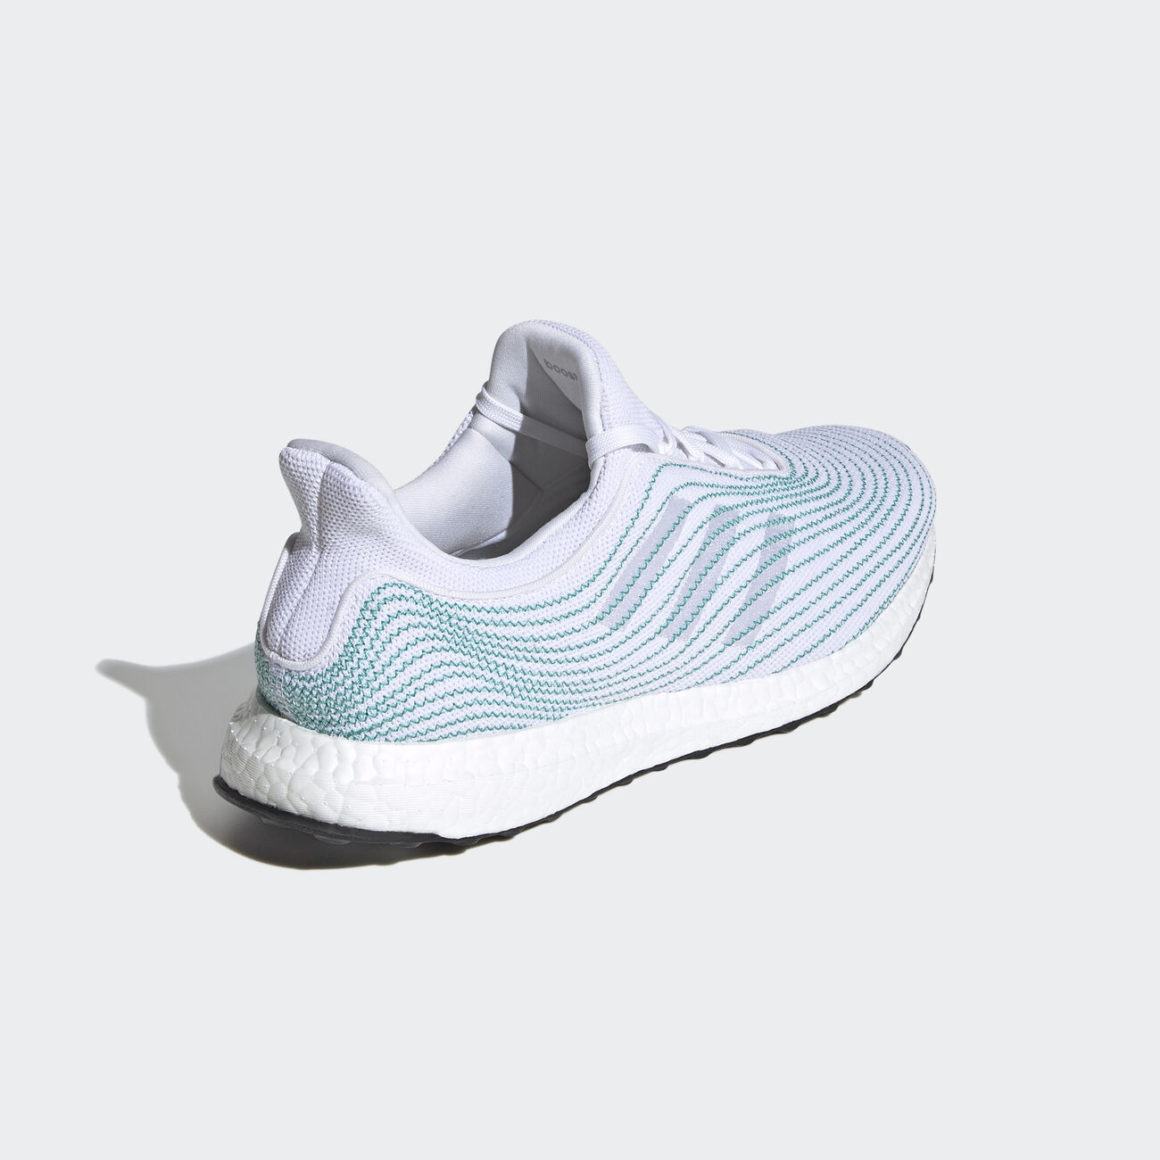 Parley x adidas Ultra Boost Uncaged